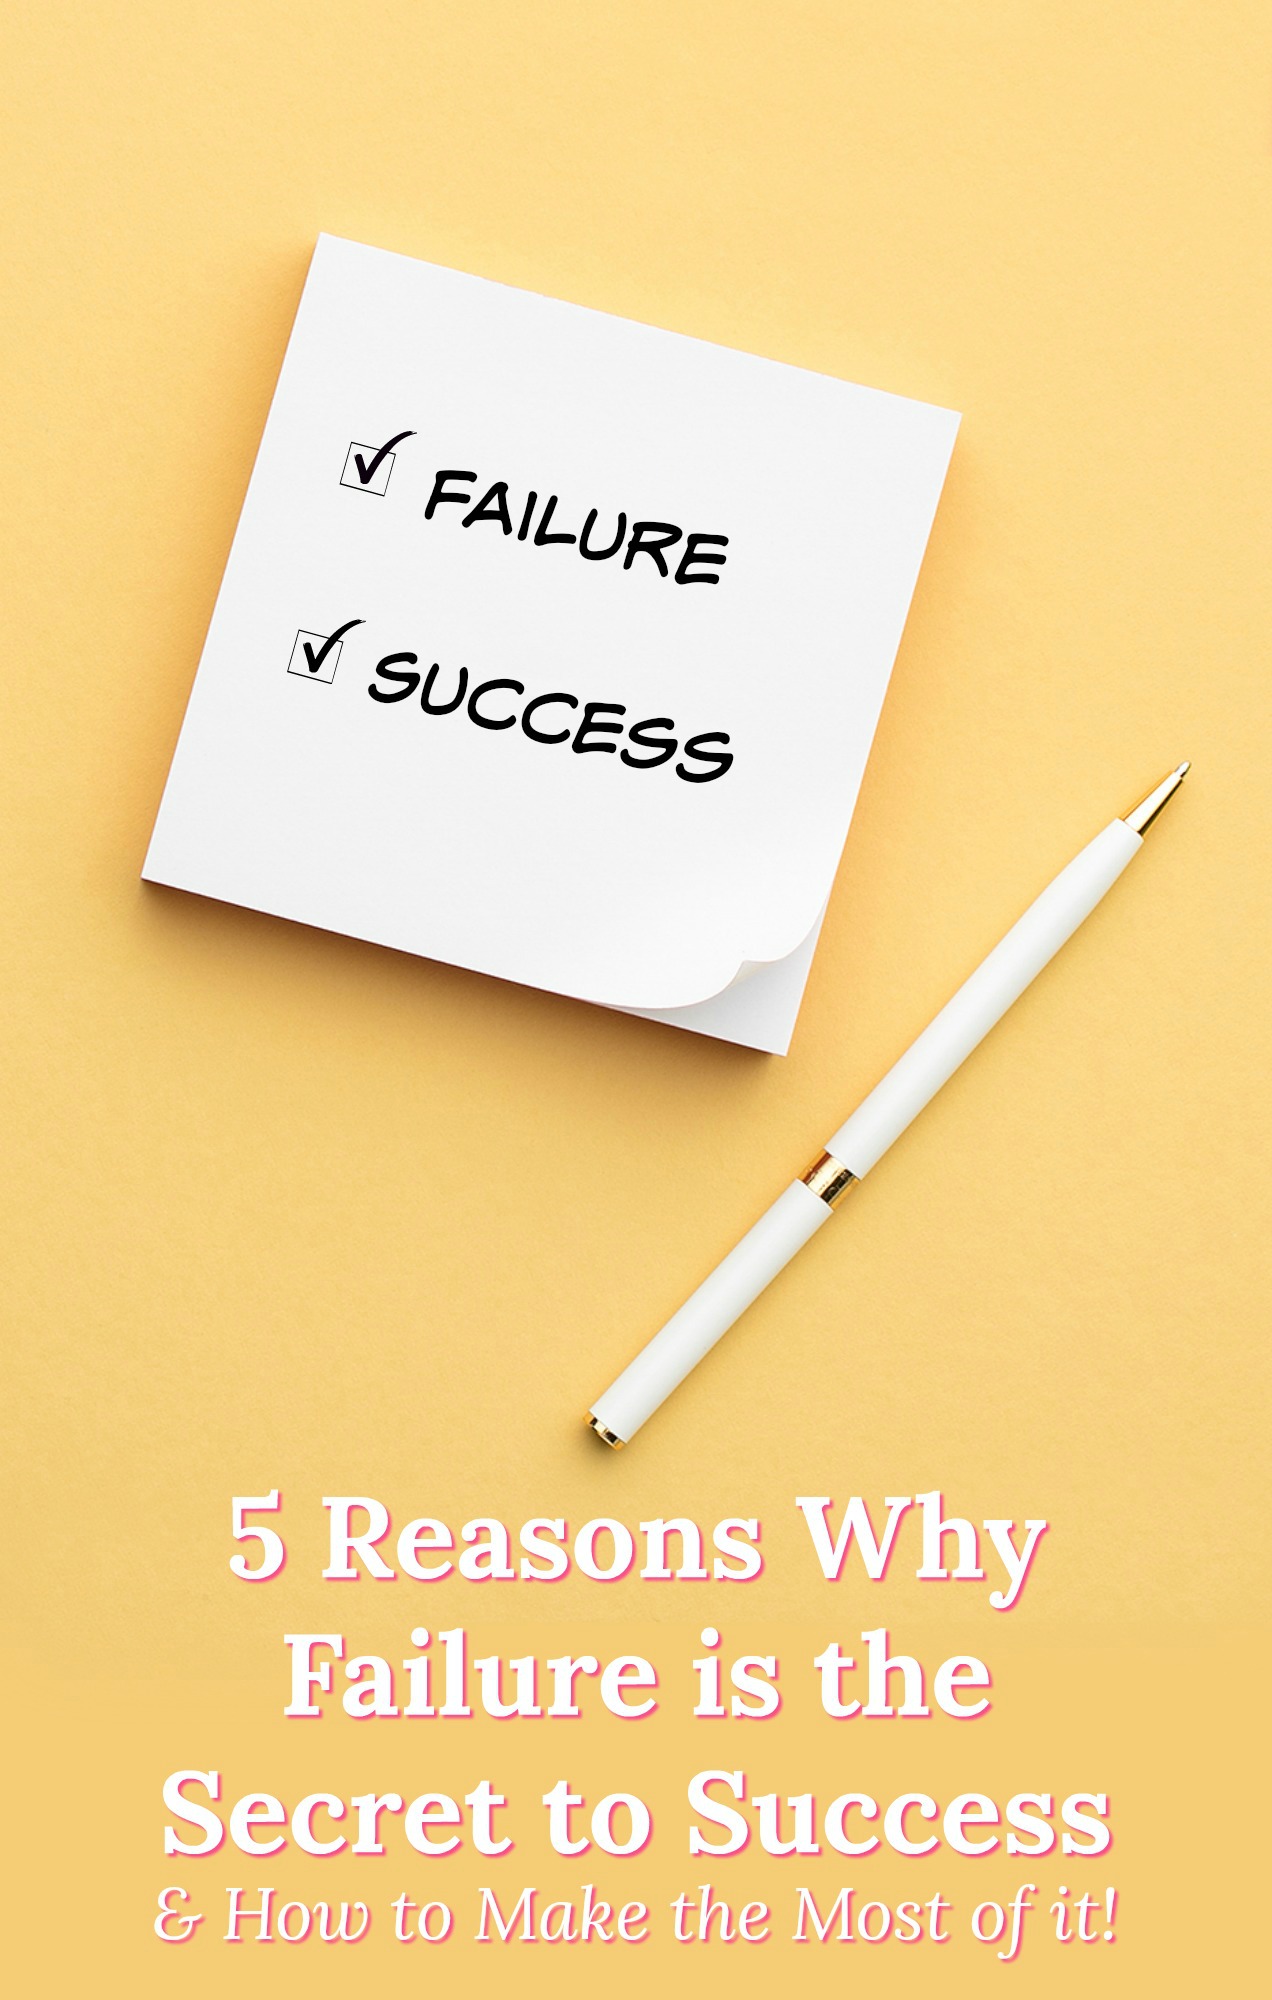 A white post-it notepad and pen sit on a yellow background. The words "failure" and "success" are written on the notepad, each with a checked box next to it. Text across the bottom of the image says "5 Reasons Why Failure is the Secret to Success & How to Make the Most of It"